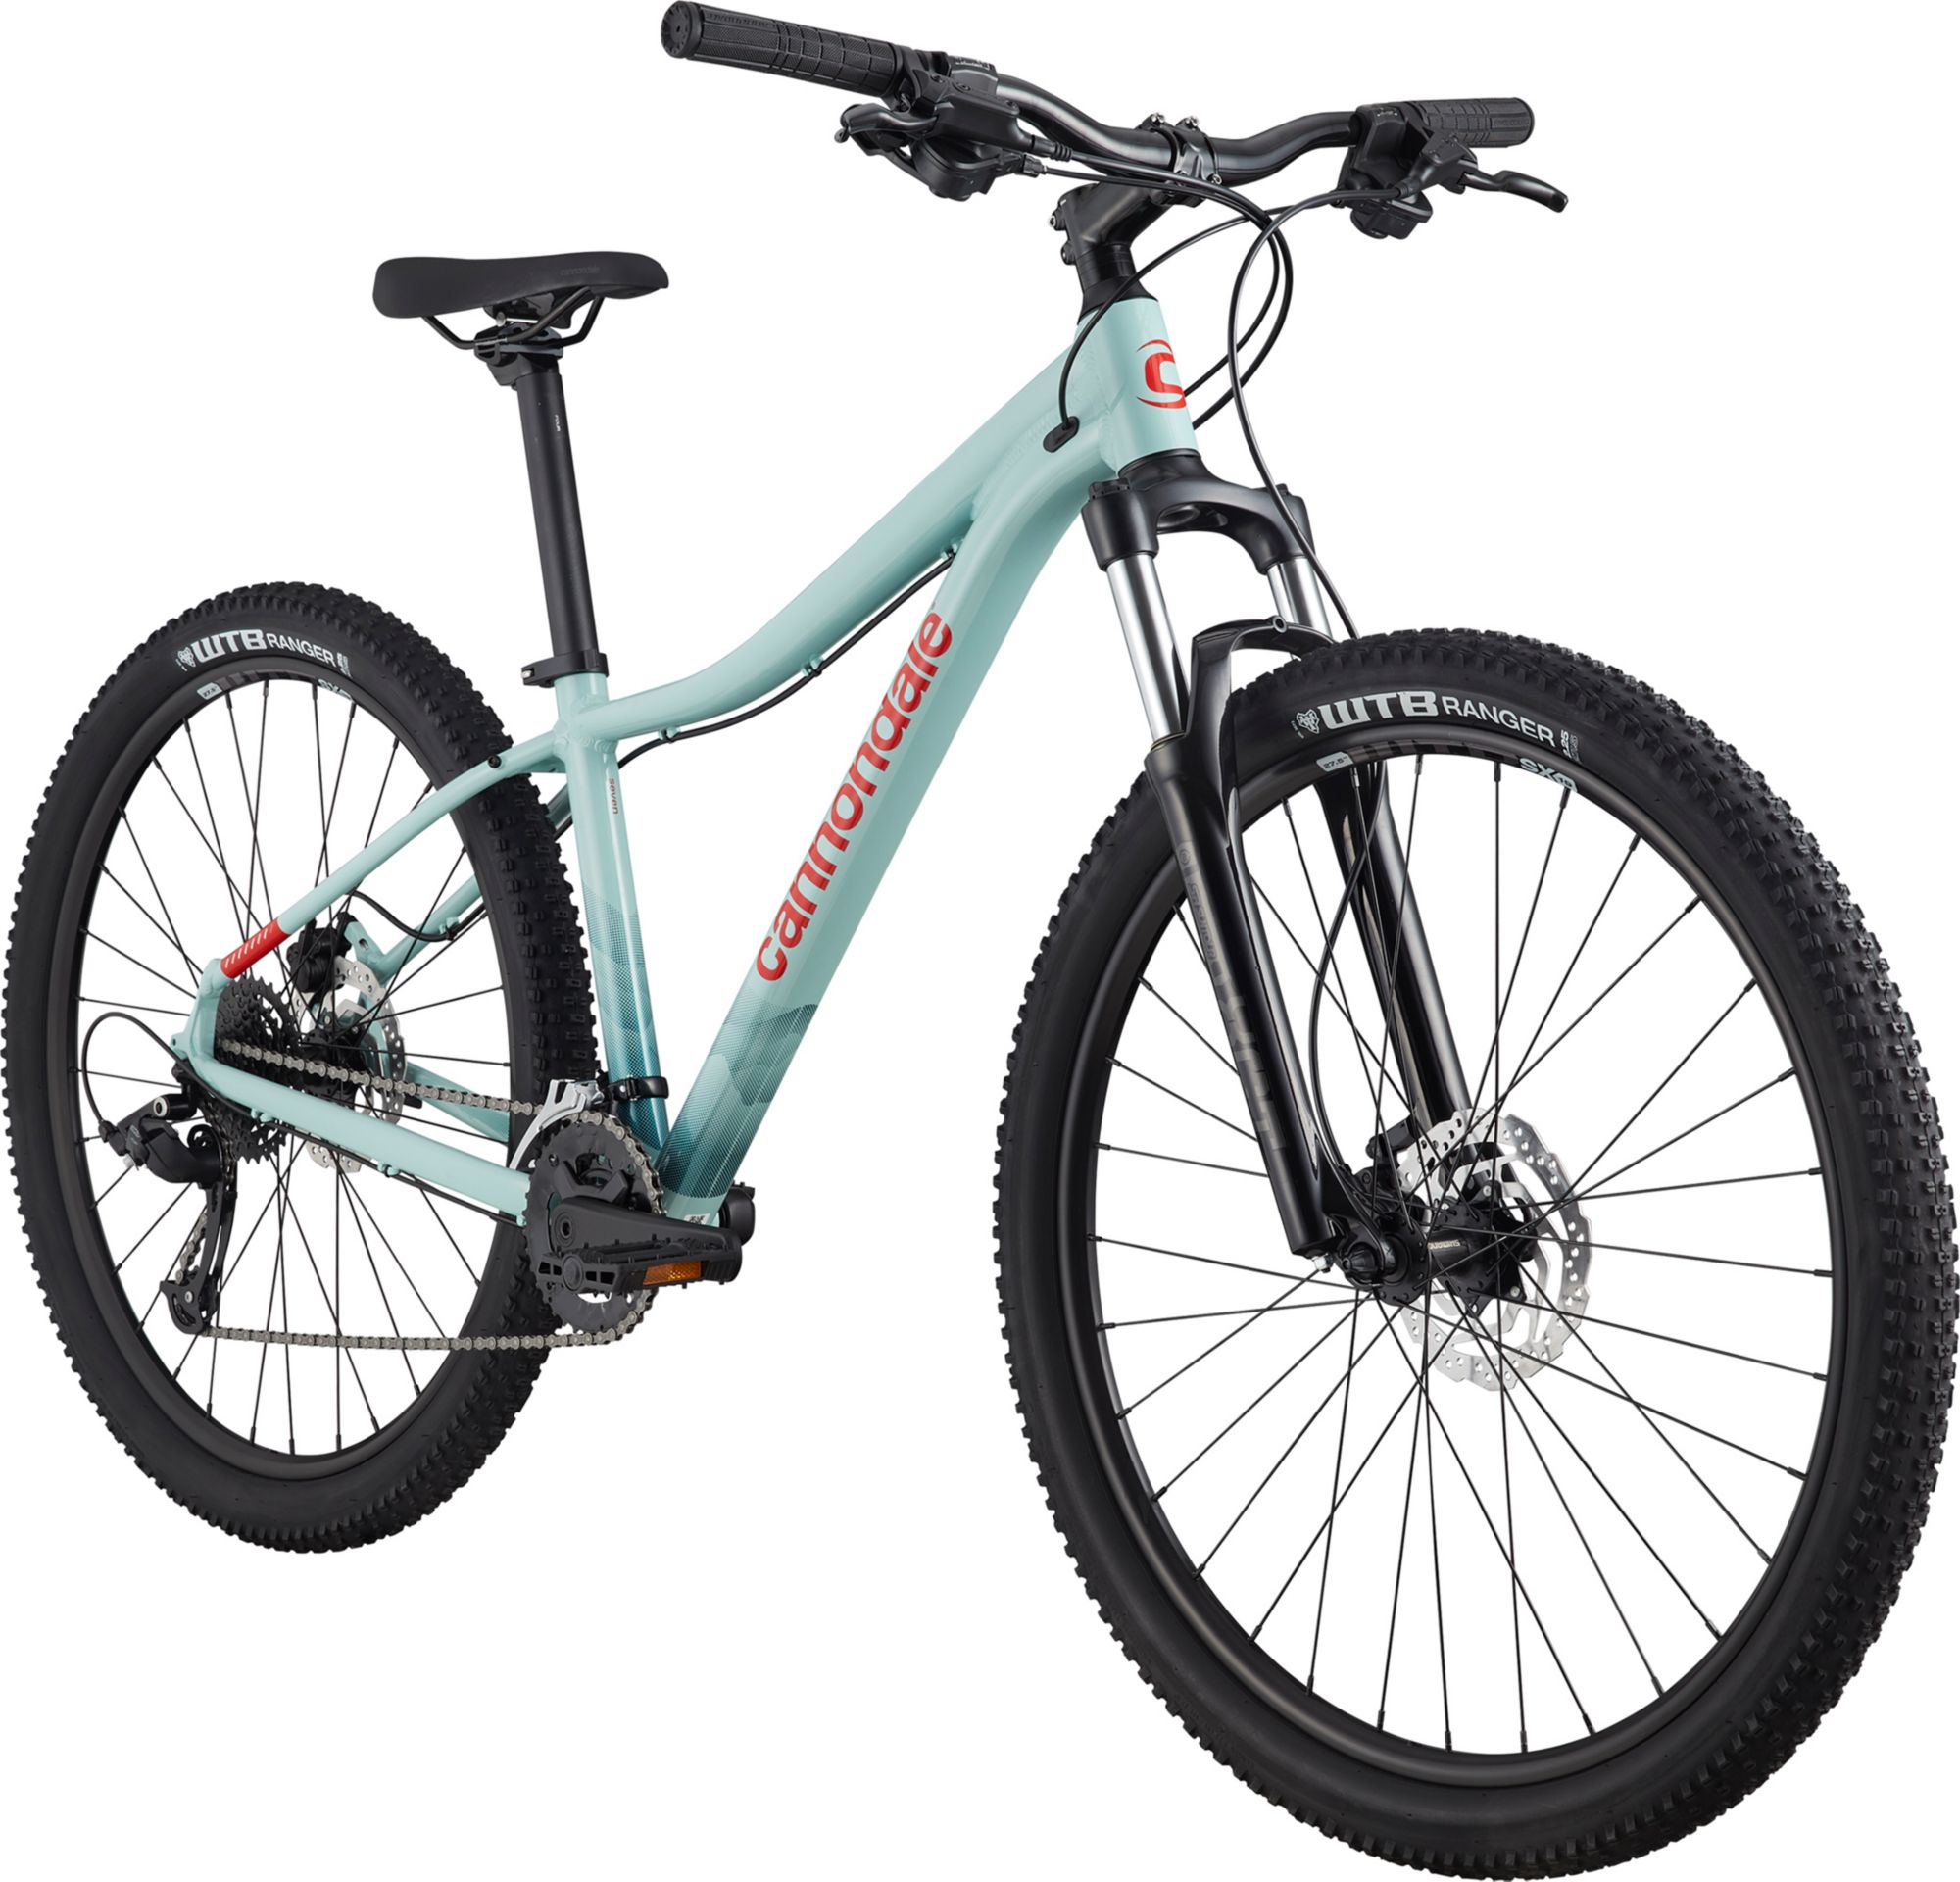 Cannondale Trail SL 29'er 4 reviews and prices - 29er bikes